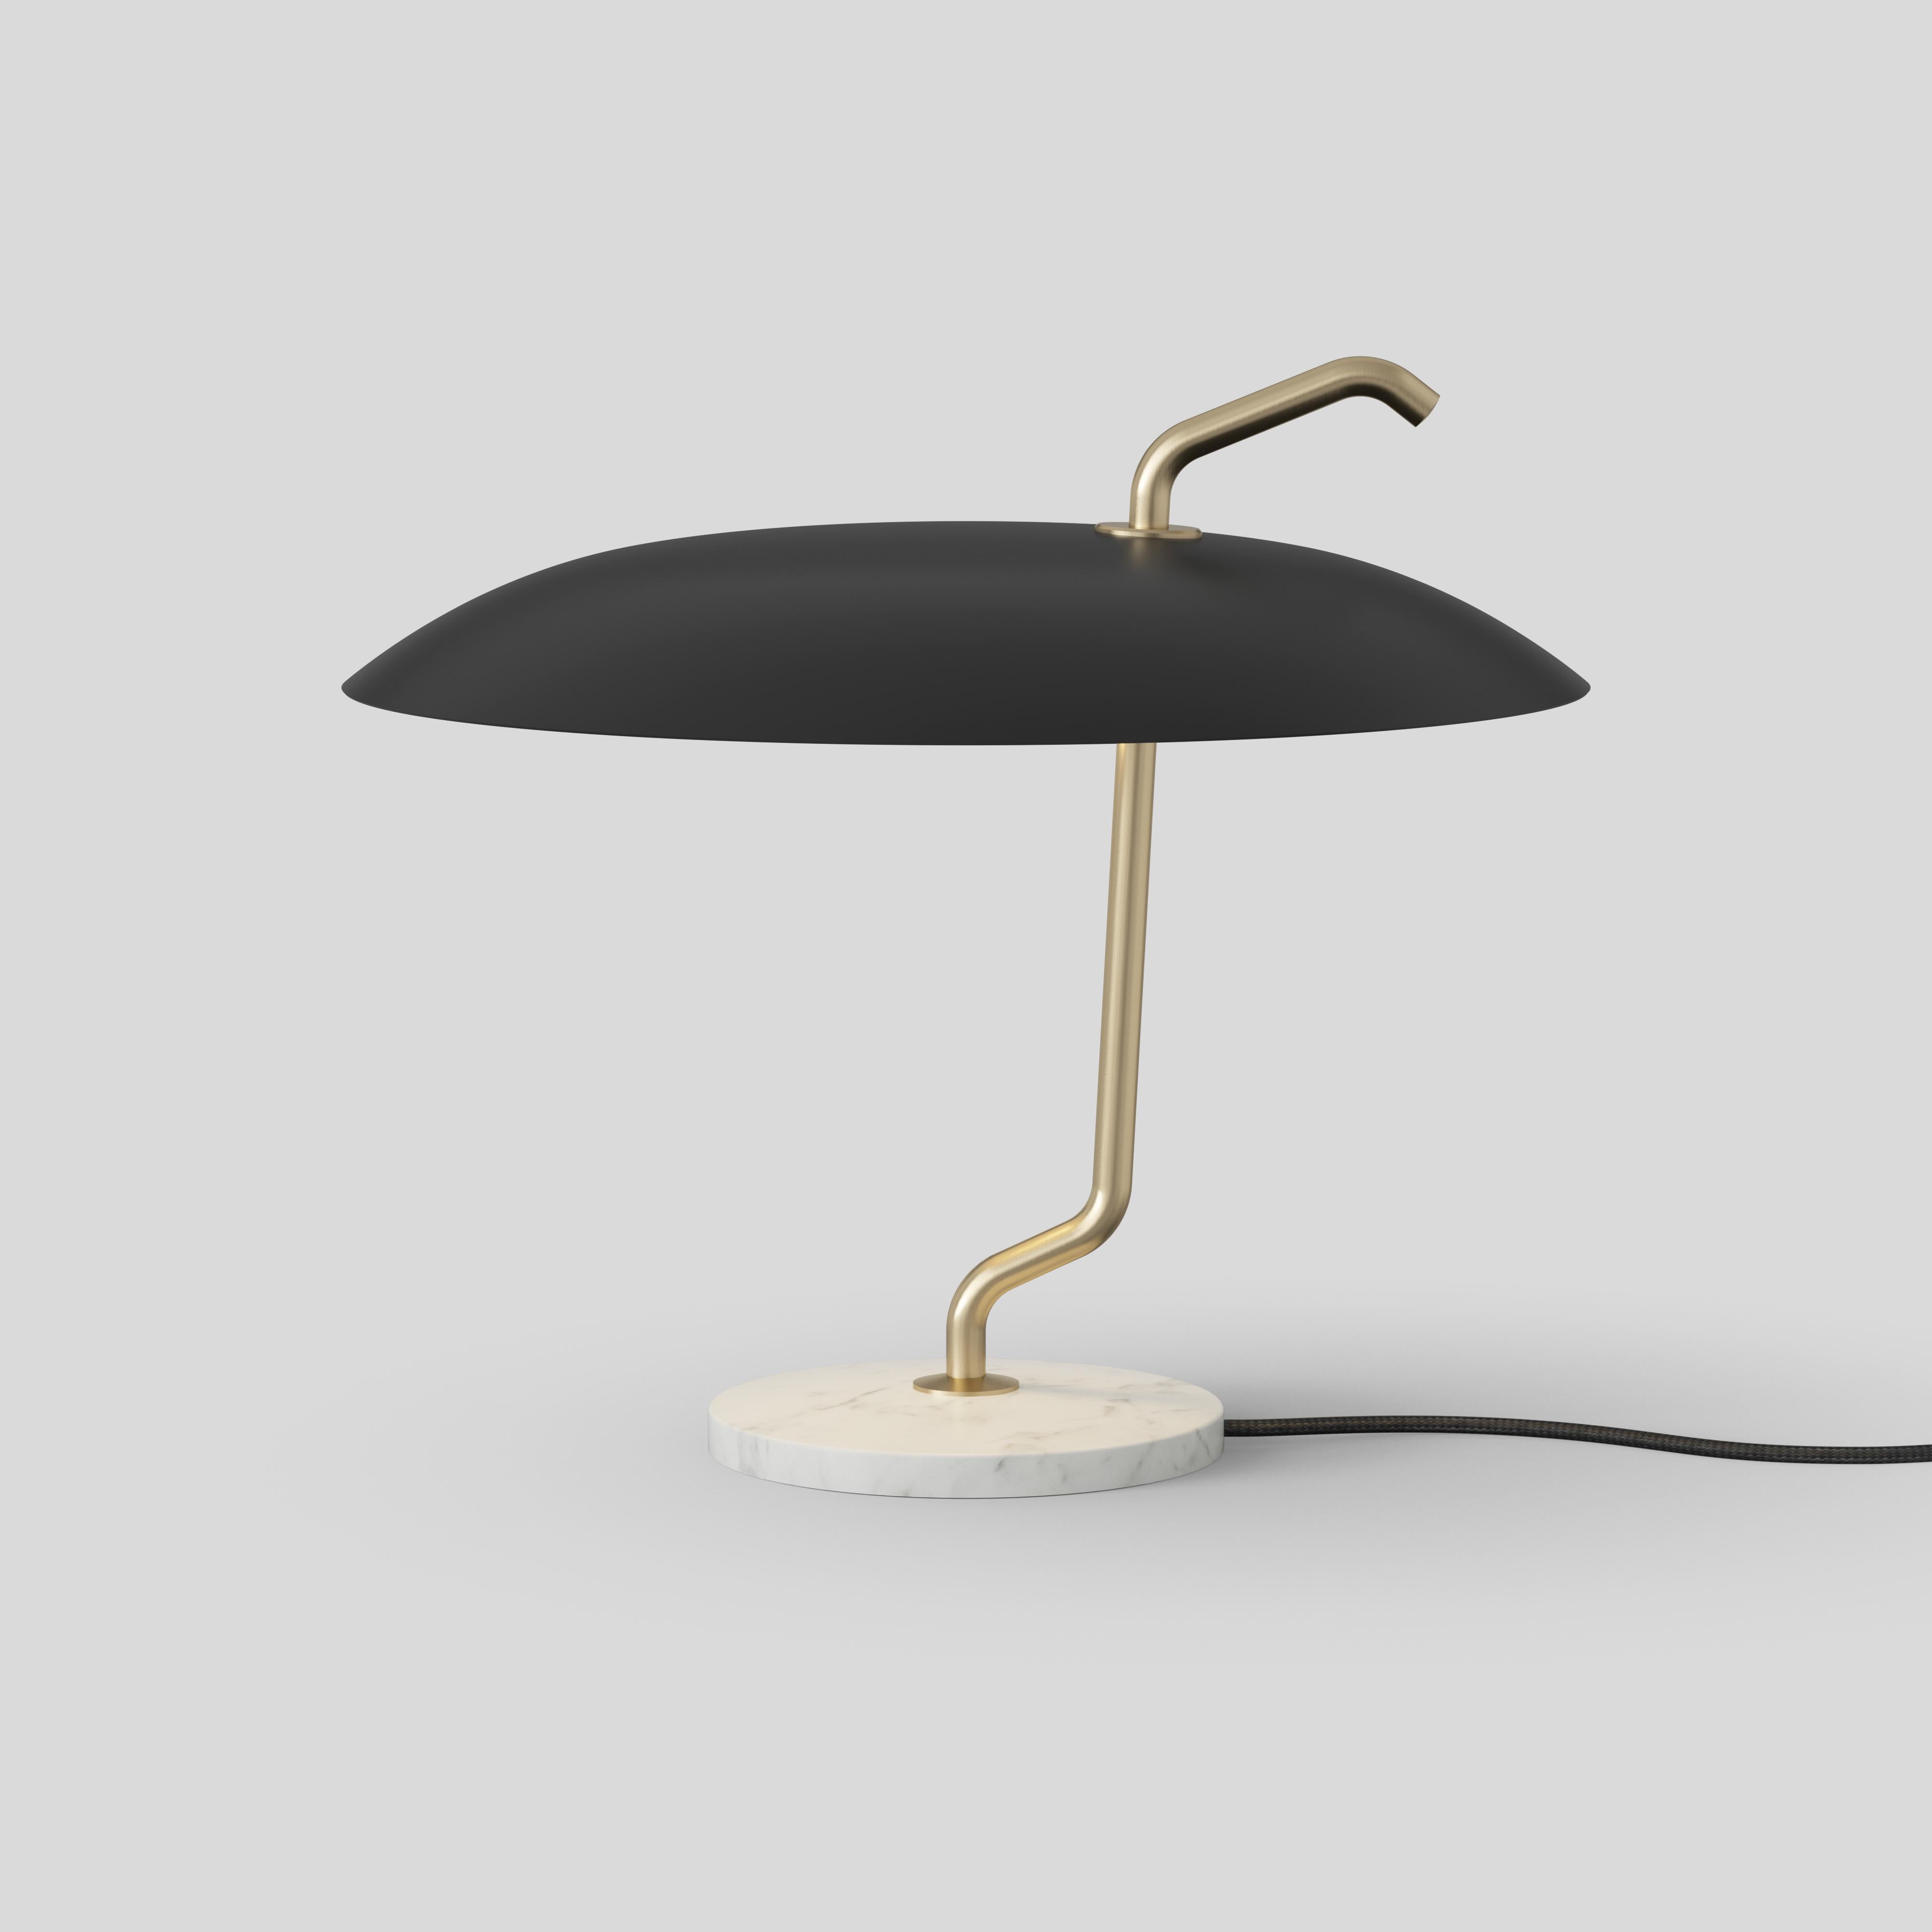 Gino Sarfatti lamp model 537.
Brass structure, black reflector, white marble.
Manufactured by Astep

Model 537
Design by Gino Sarfatti
In its refined simplicity, Model 537 stands out owing to the combination of rich materials and ingenious, playful